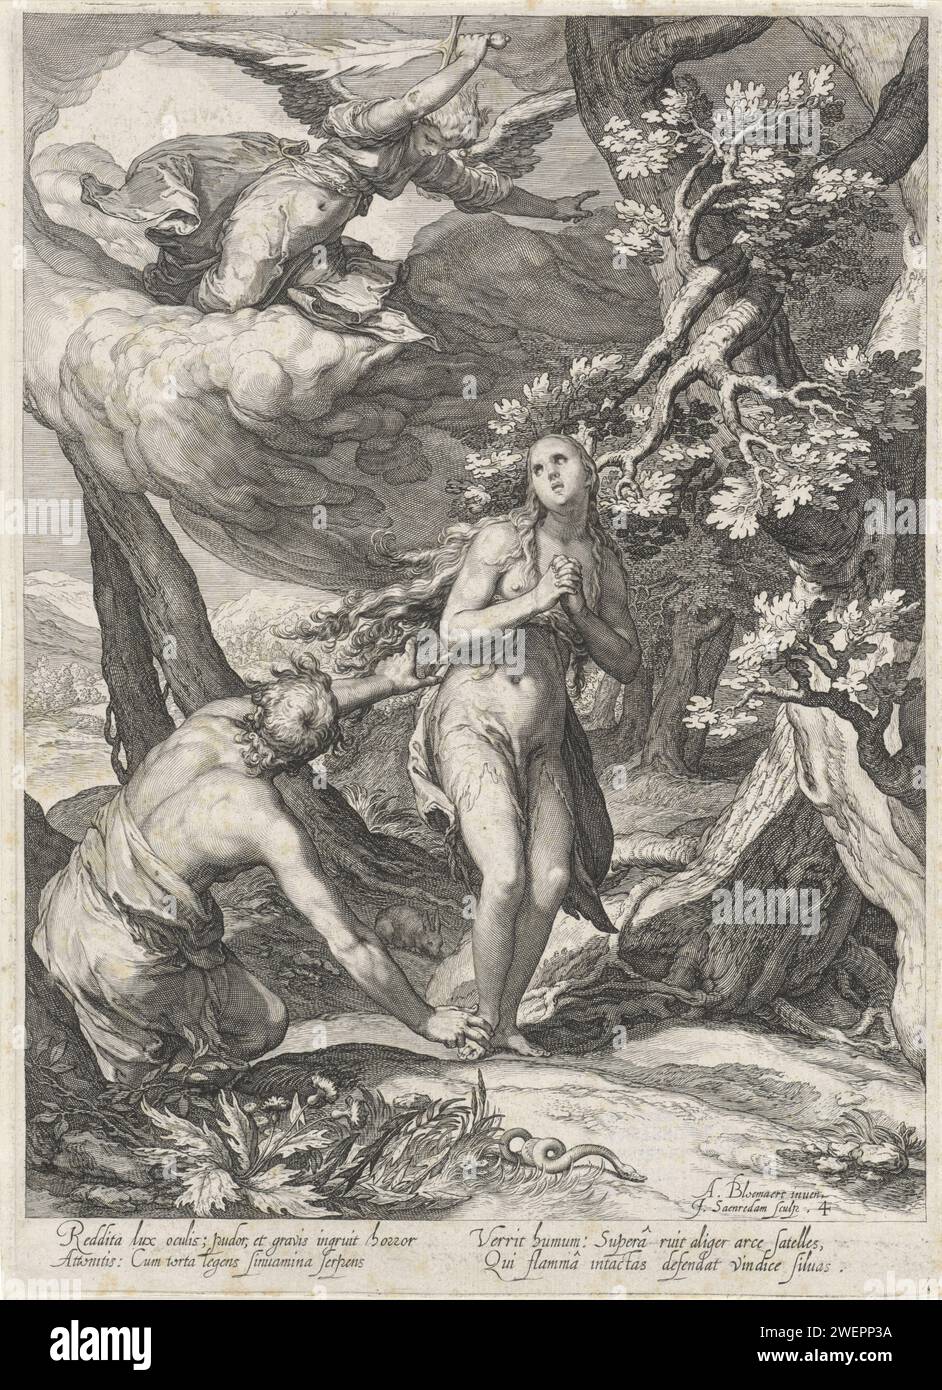 Expulsion from Paradise, Jan Saenredam, after Abraham Bloemaert, 1604 print Adam and Eva are driven out by the angel with the flaming sword from earthly paradise. The snake crawls next to them.  paper engraving expulsion of Adam and Eve from paradise (Genesis 3:22-24) Stock Photo